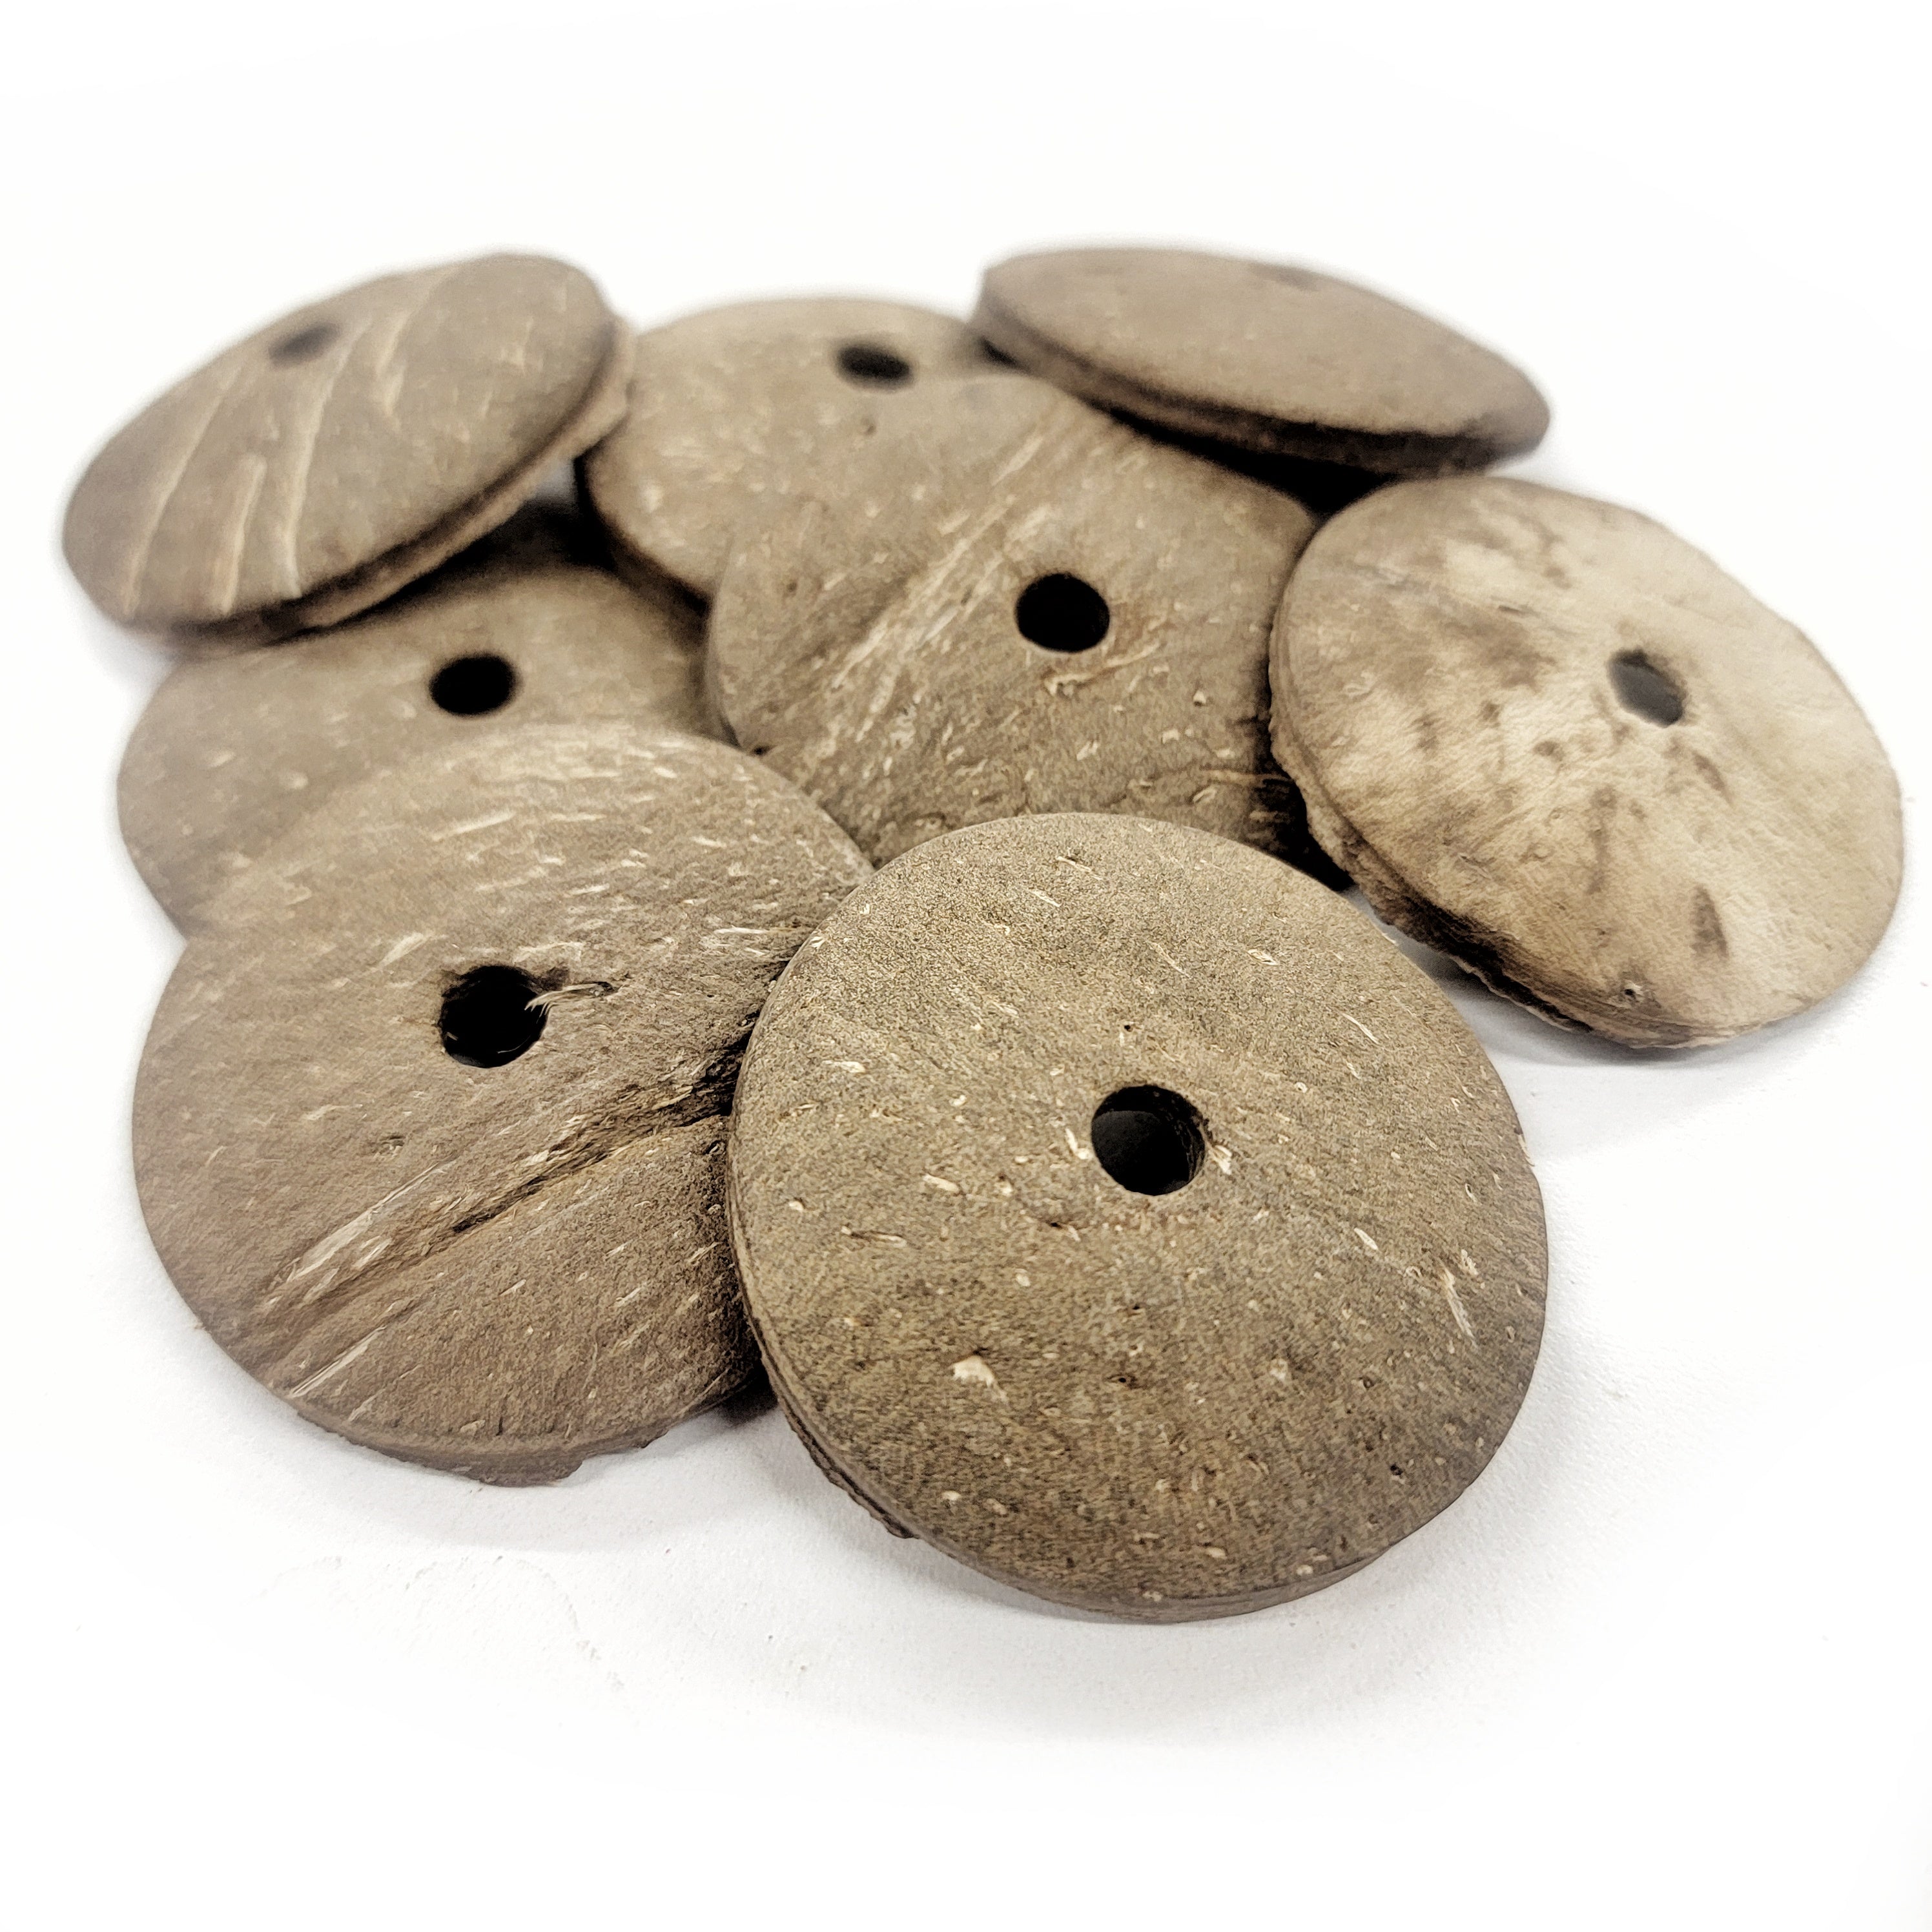 Small Coconut Disks - 10 Pack